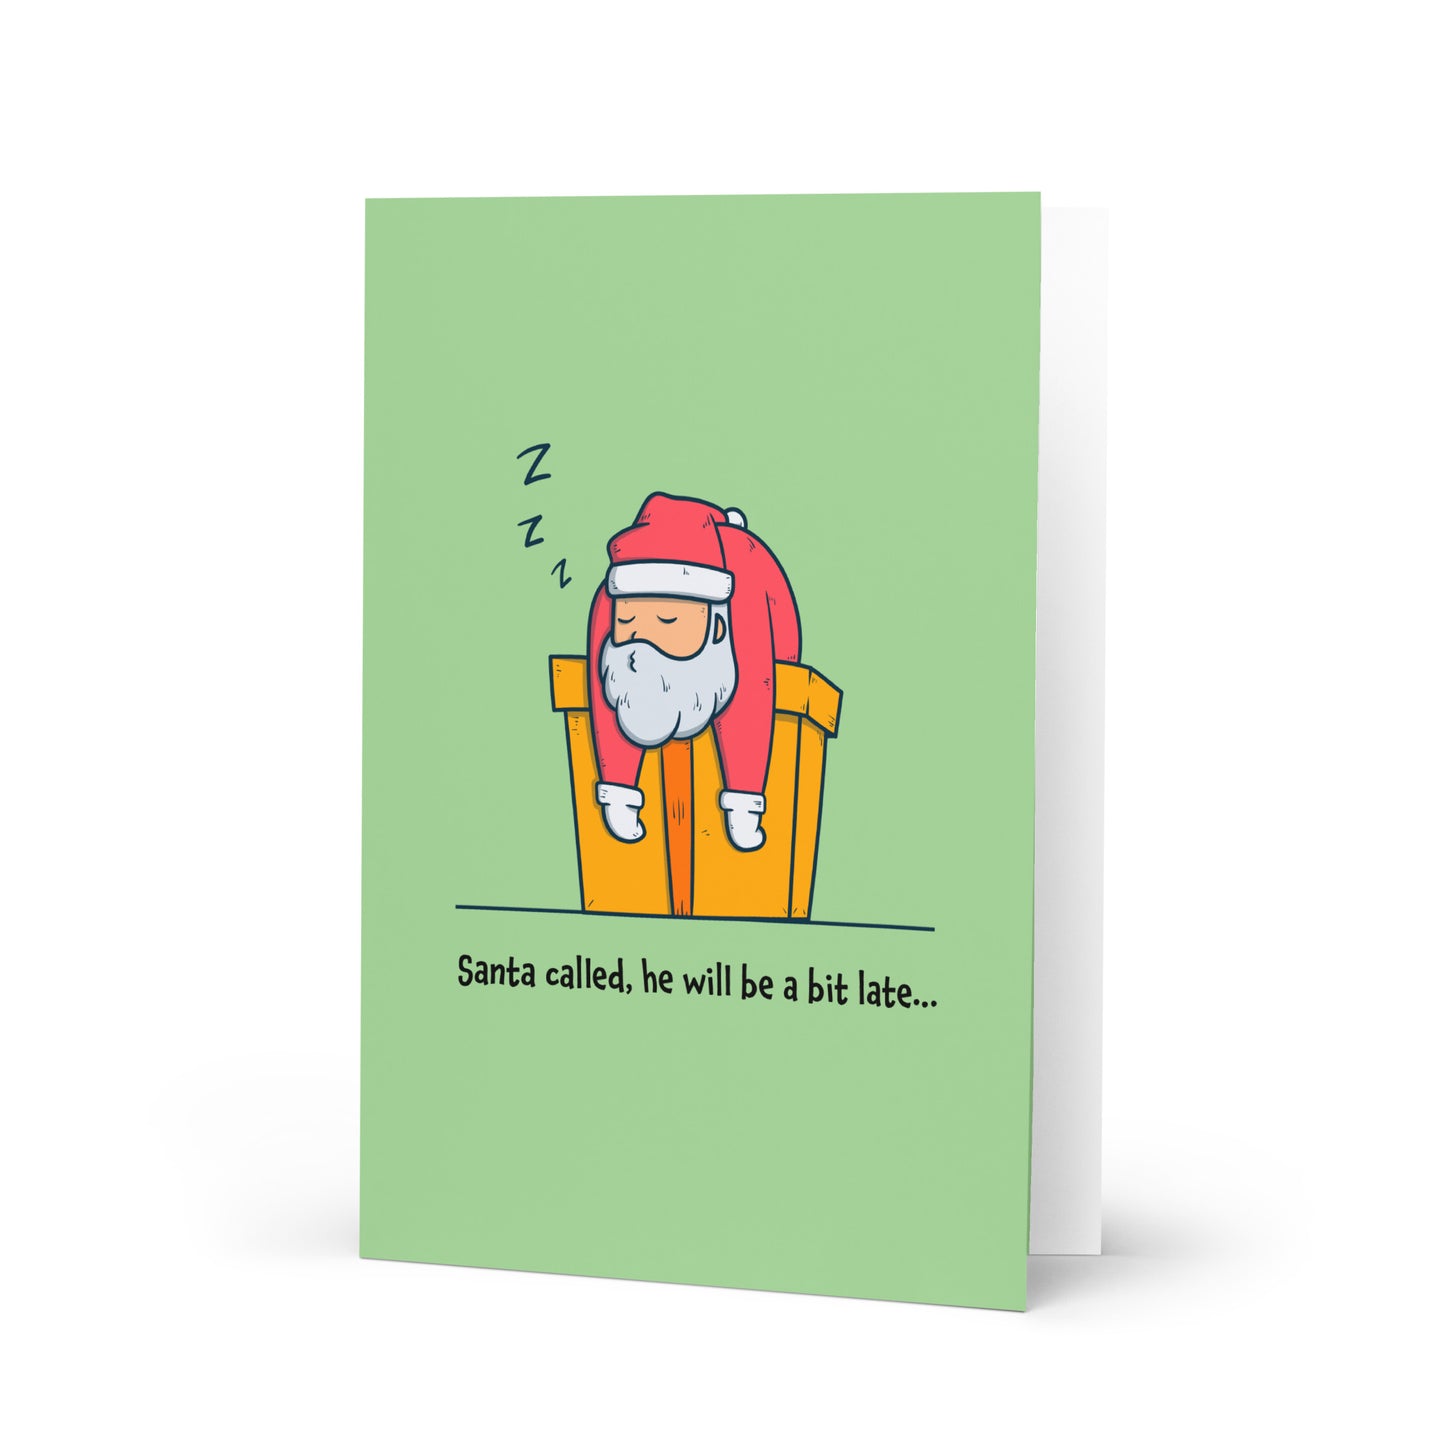 Santa Called, He Will Be a Bit Late - Funny Christmas Card for Kids